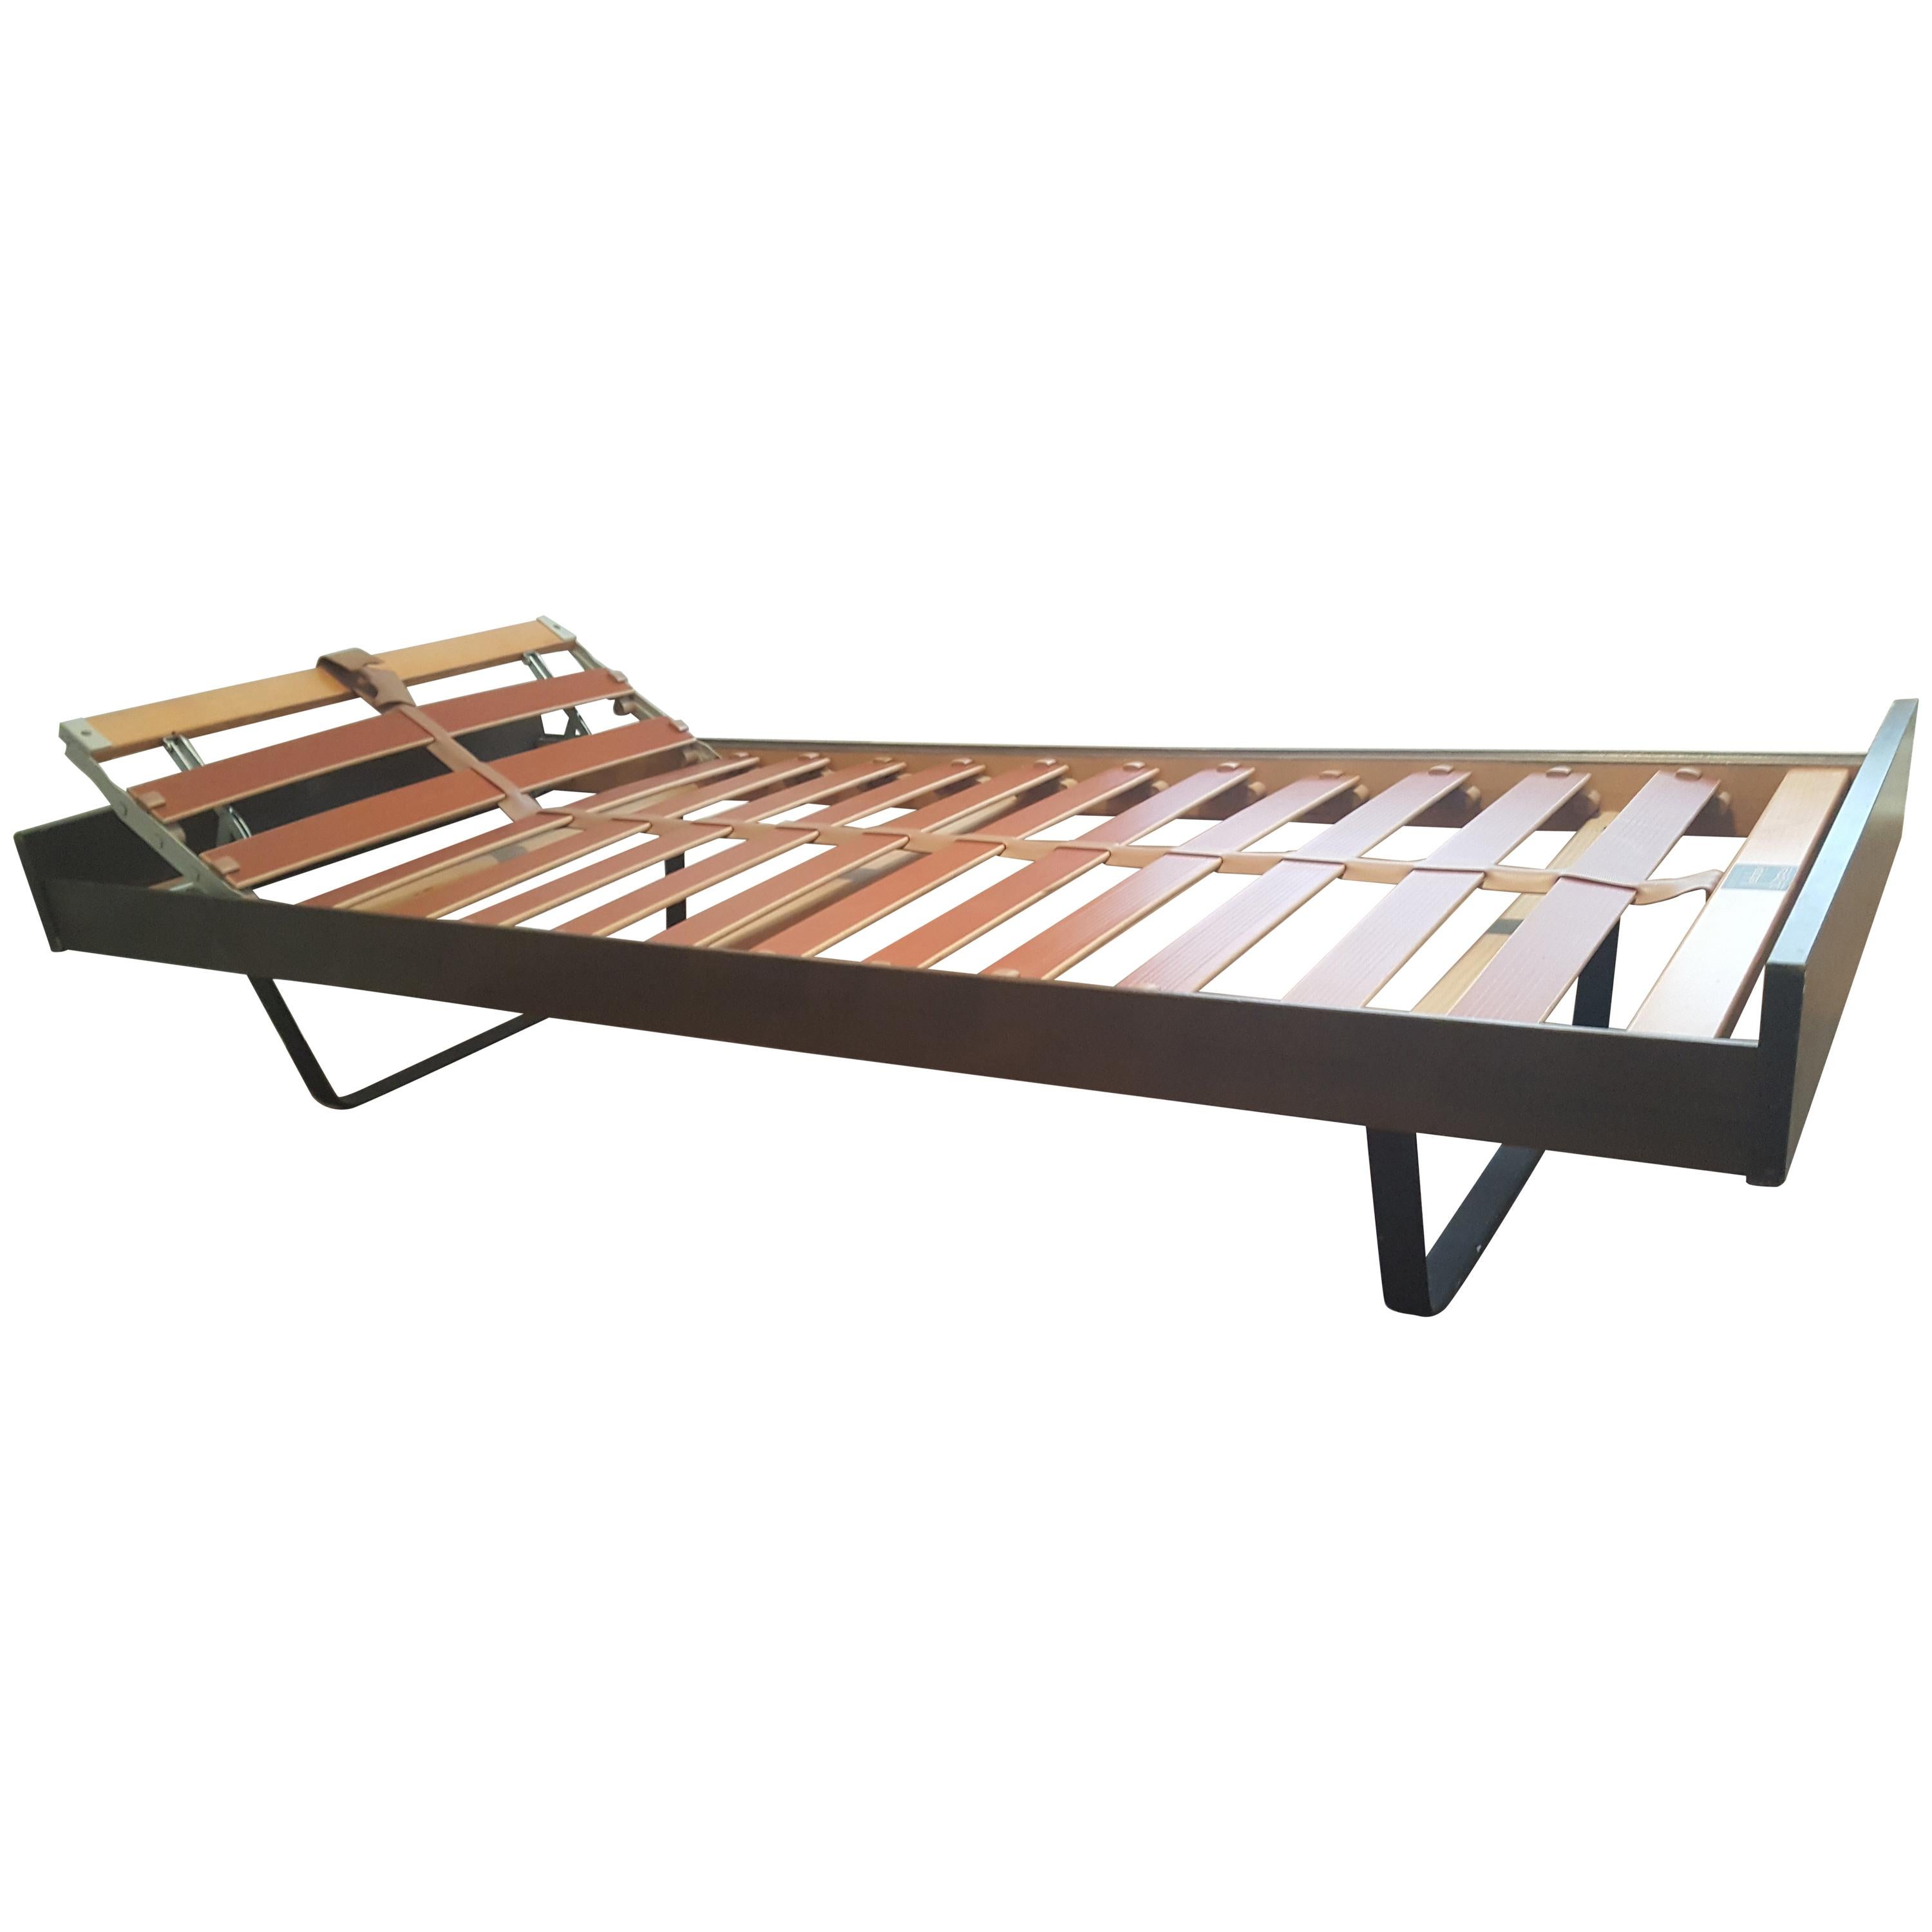 Pair of Lattoflex Beds/Daybeds For Sale